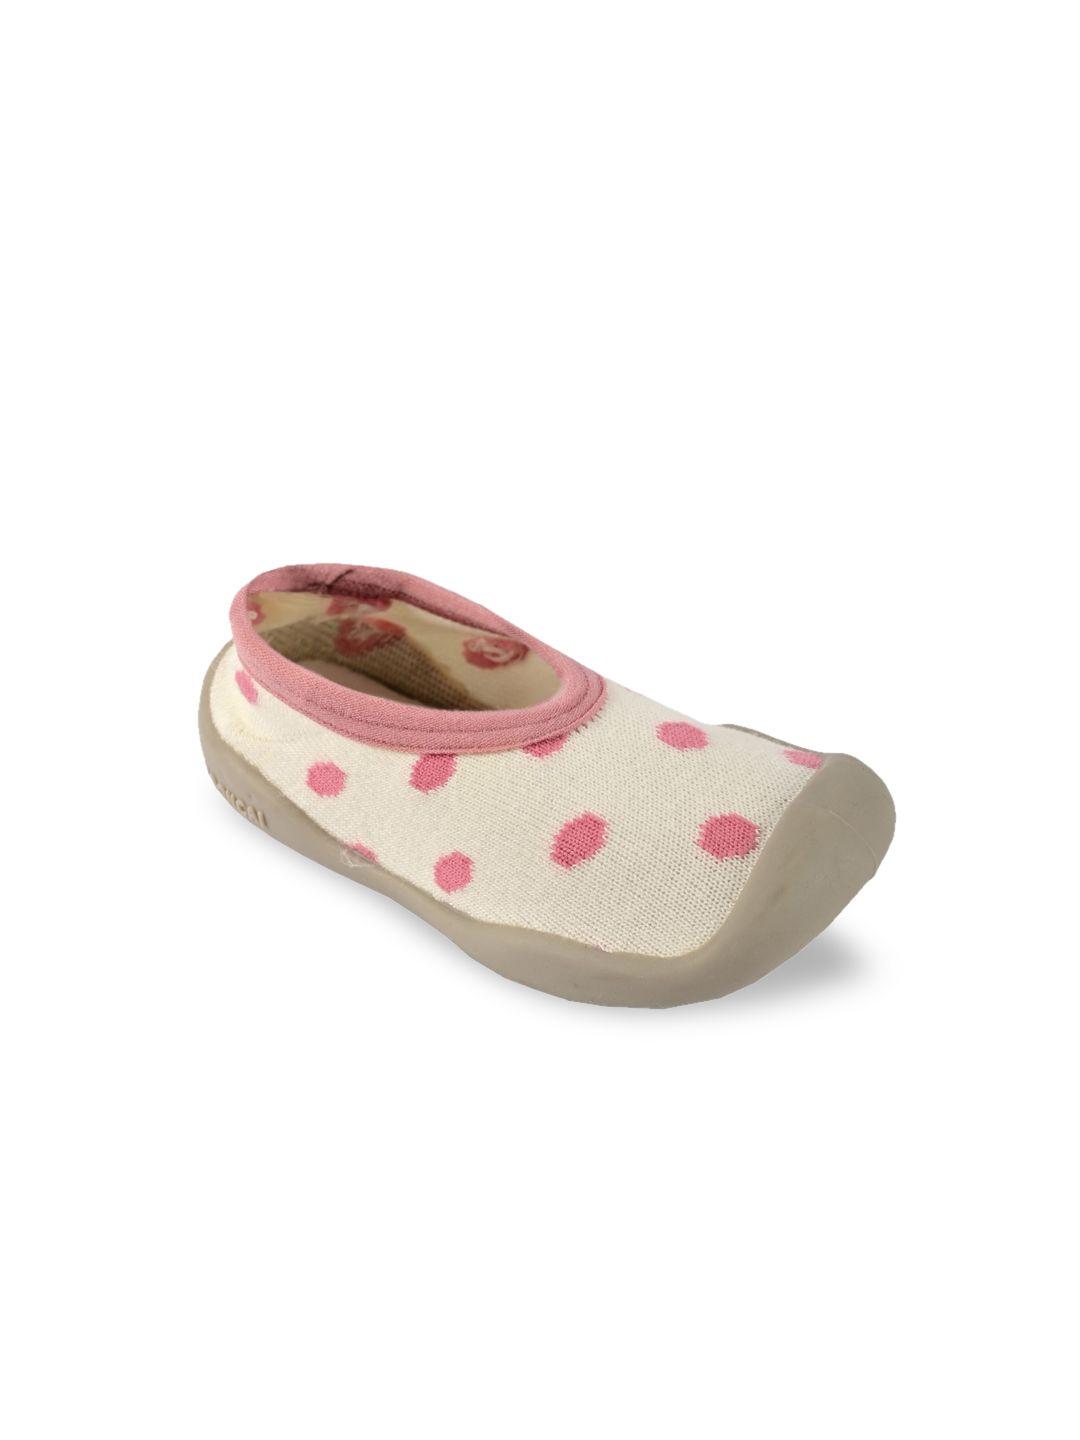 yellow bee infant kids pink & cream-colored anti-skid booties